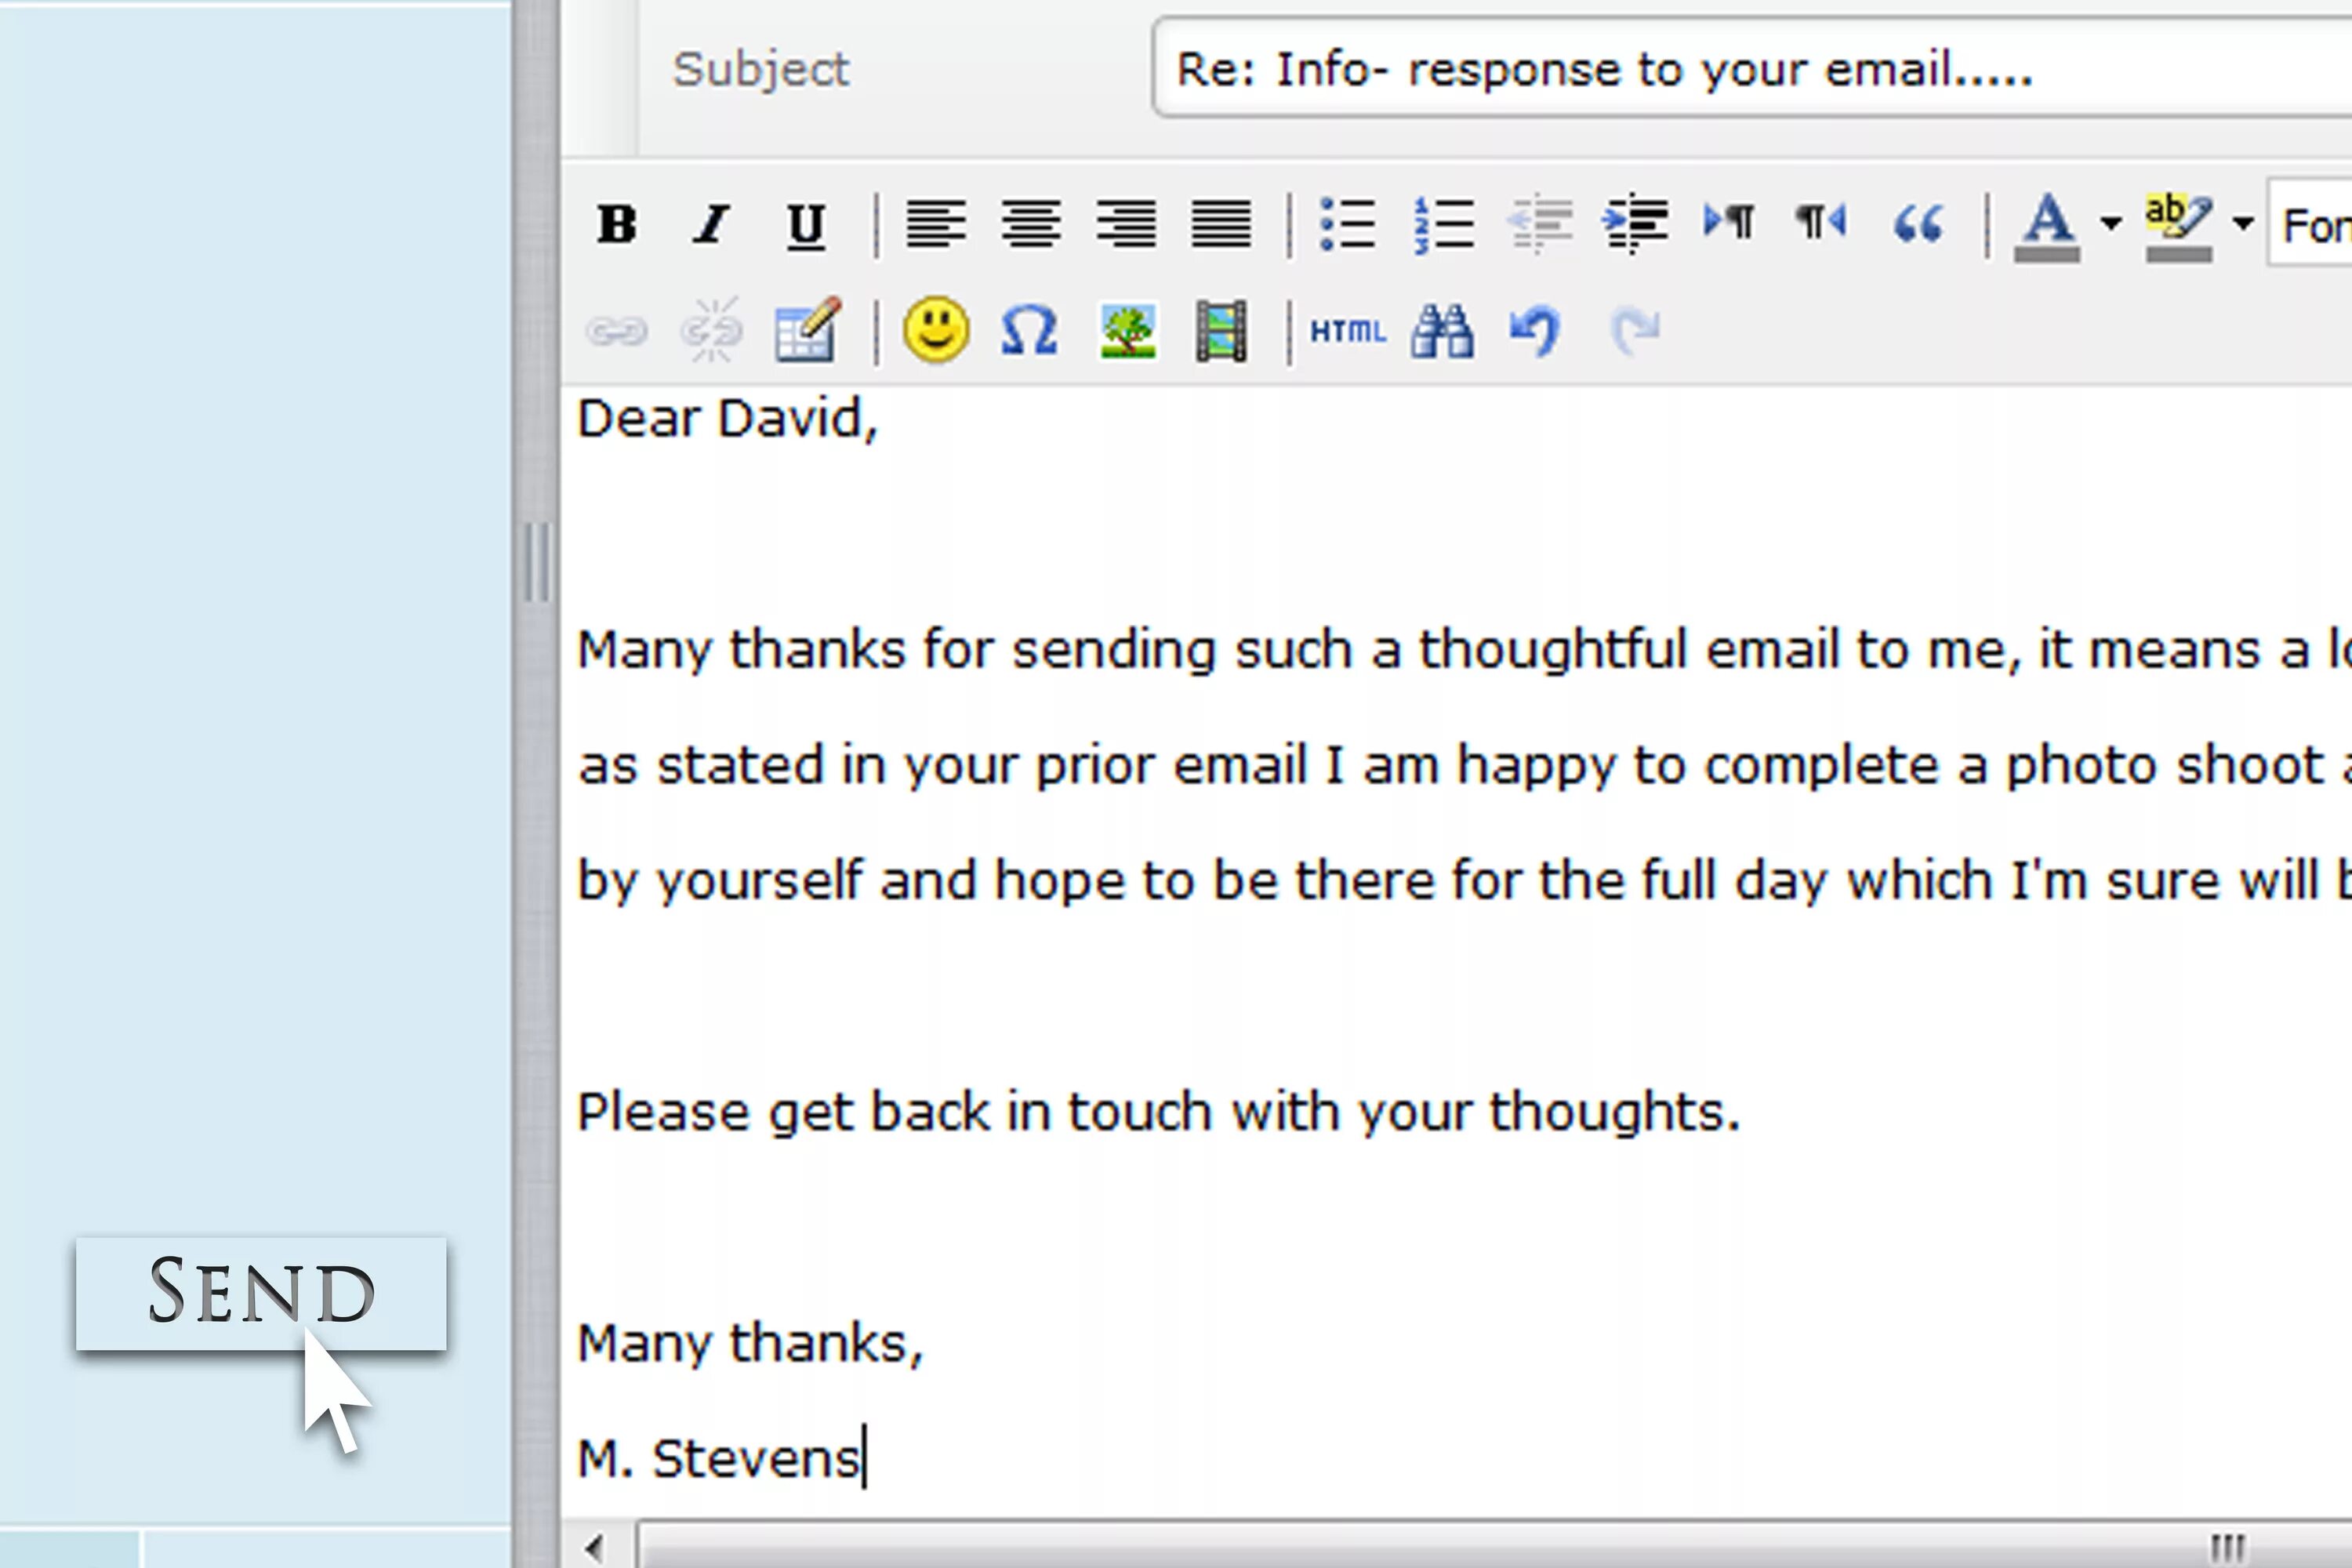 Reply to this email. Response email. Responding to email. How to thank someone in an email. Dear ... Email.